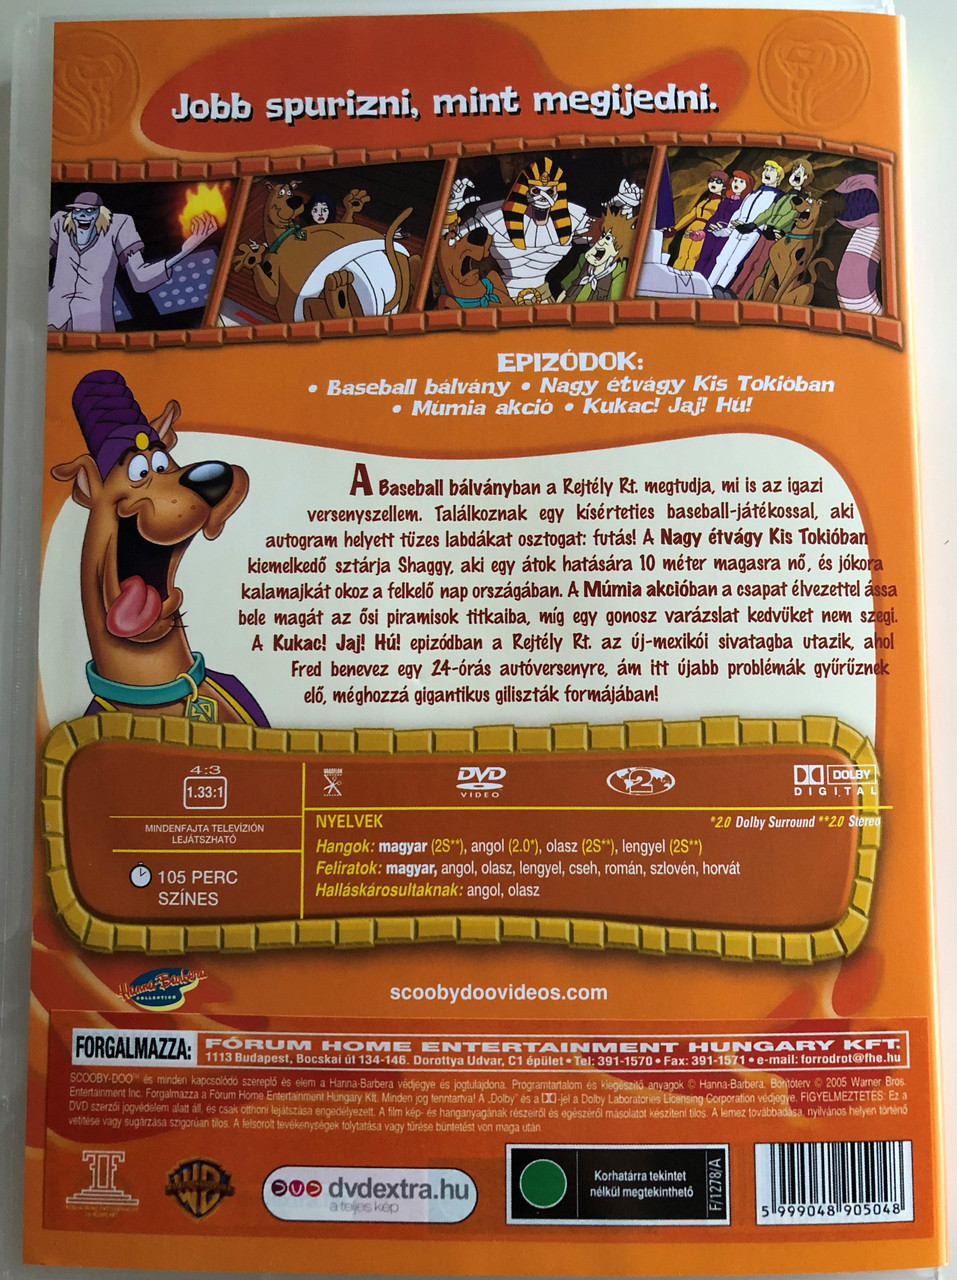 What's new Scooby-Doo? Volume 4 DVD 2003 Mizújs, Scooby-Doo? Múmia Akció /  4 episodes: The Unnatural, Big Appetite in Little Tokyo, Mummy Scares Best,  The Fast and the Wormious - bibleinmylanguage